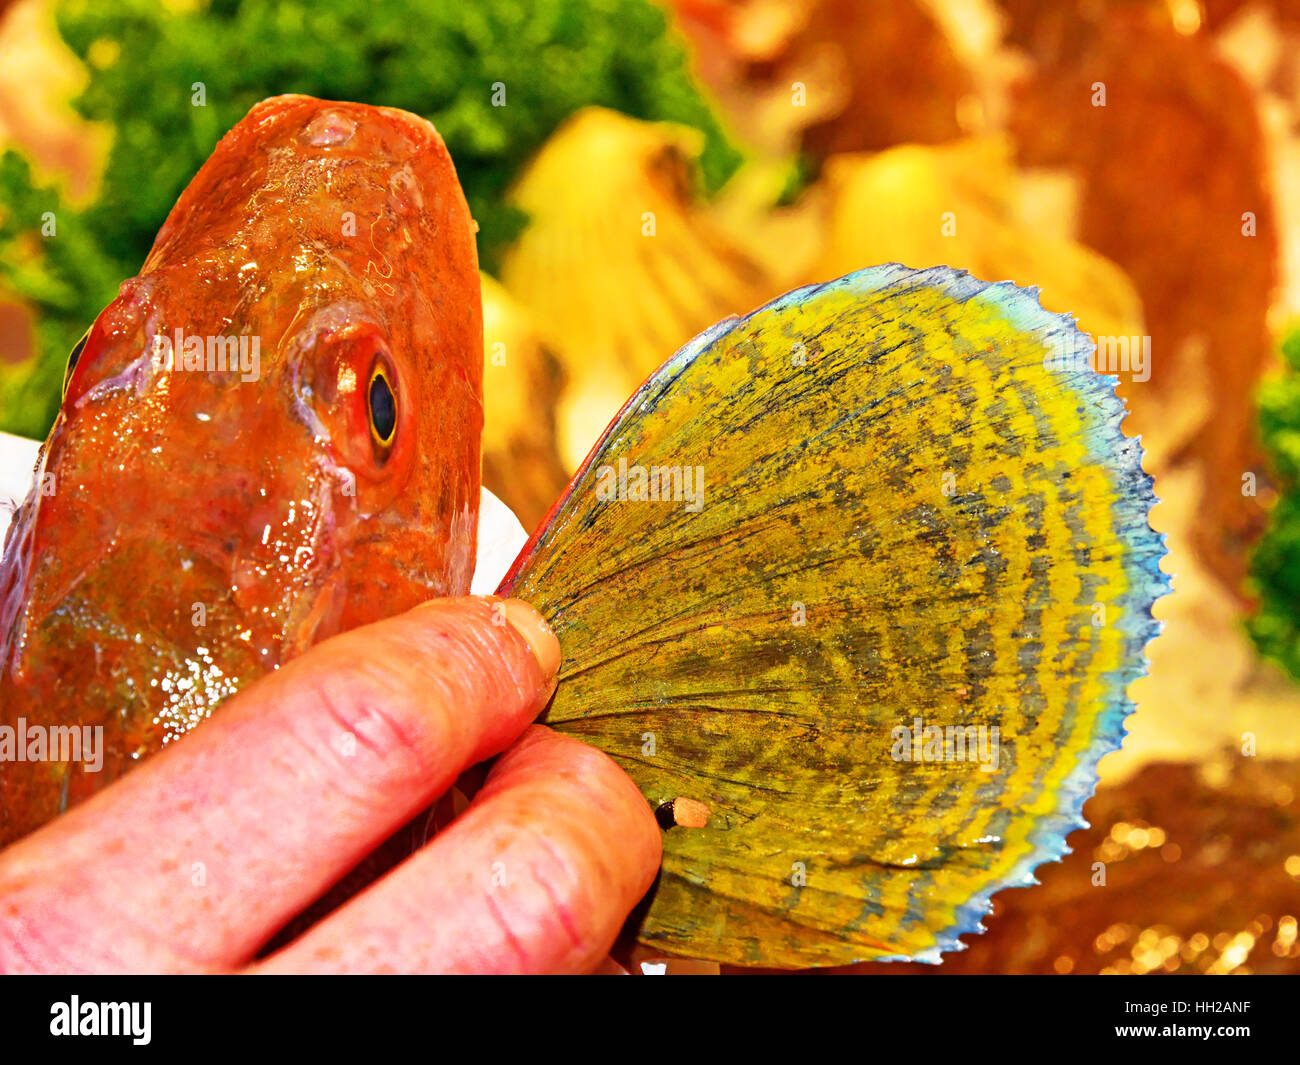 Gurnard fish showing large ventral fin Stock Photo